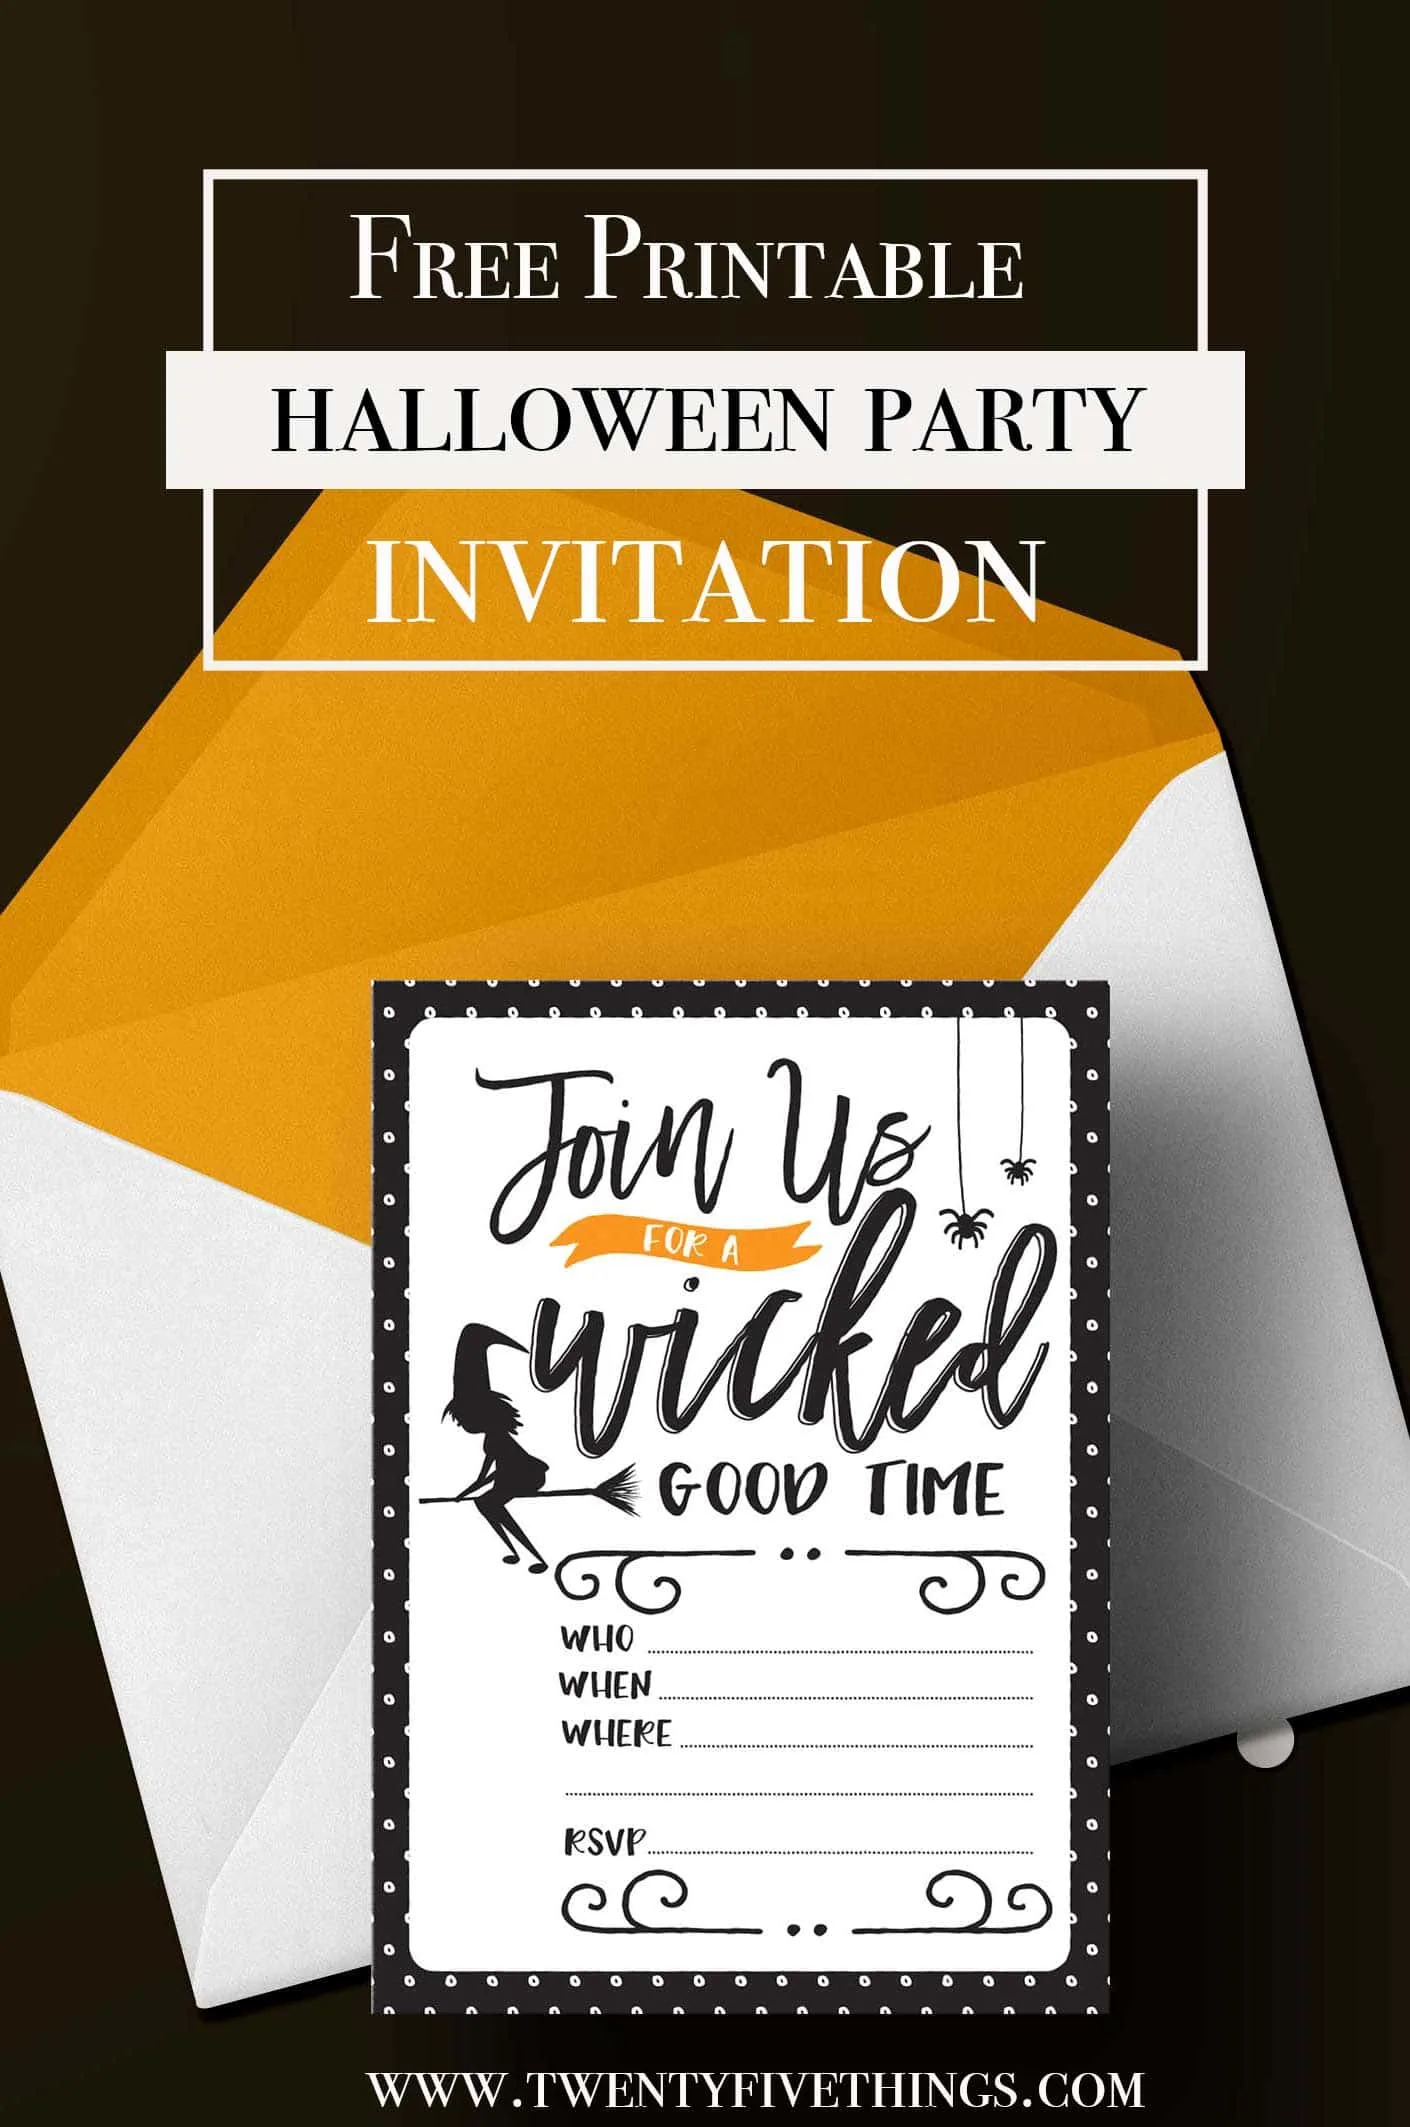 free halloween party printable invitation: Join us for a Wicked Good Time. Download and print this 5X7 Halloween party invitation for free!